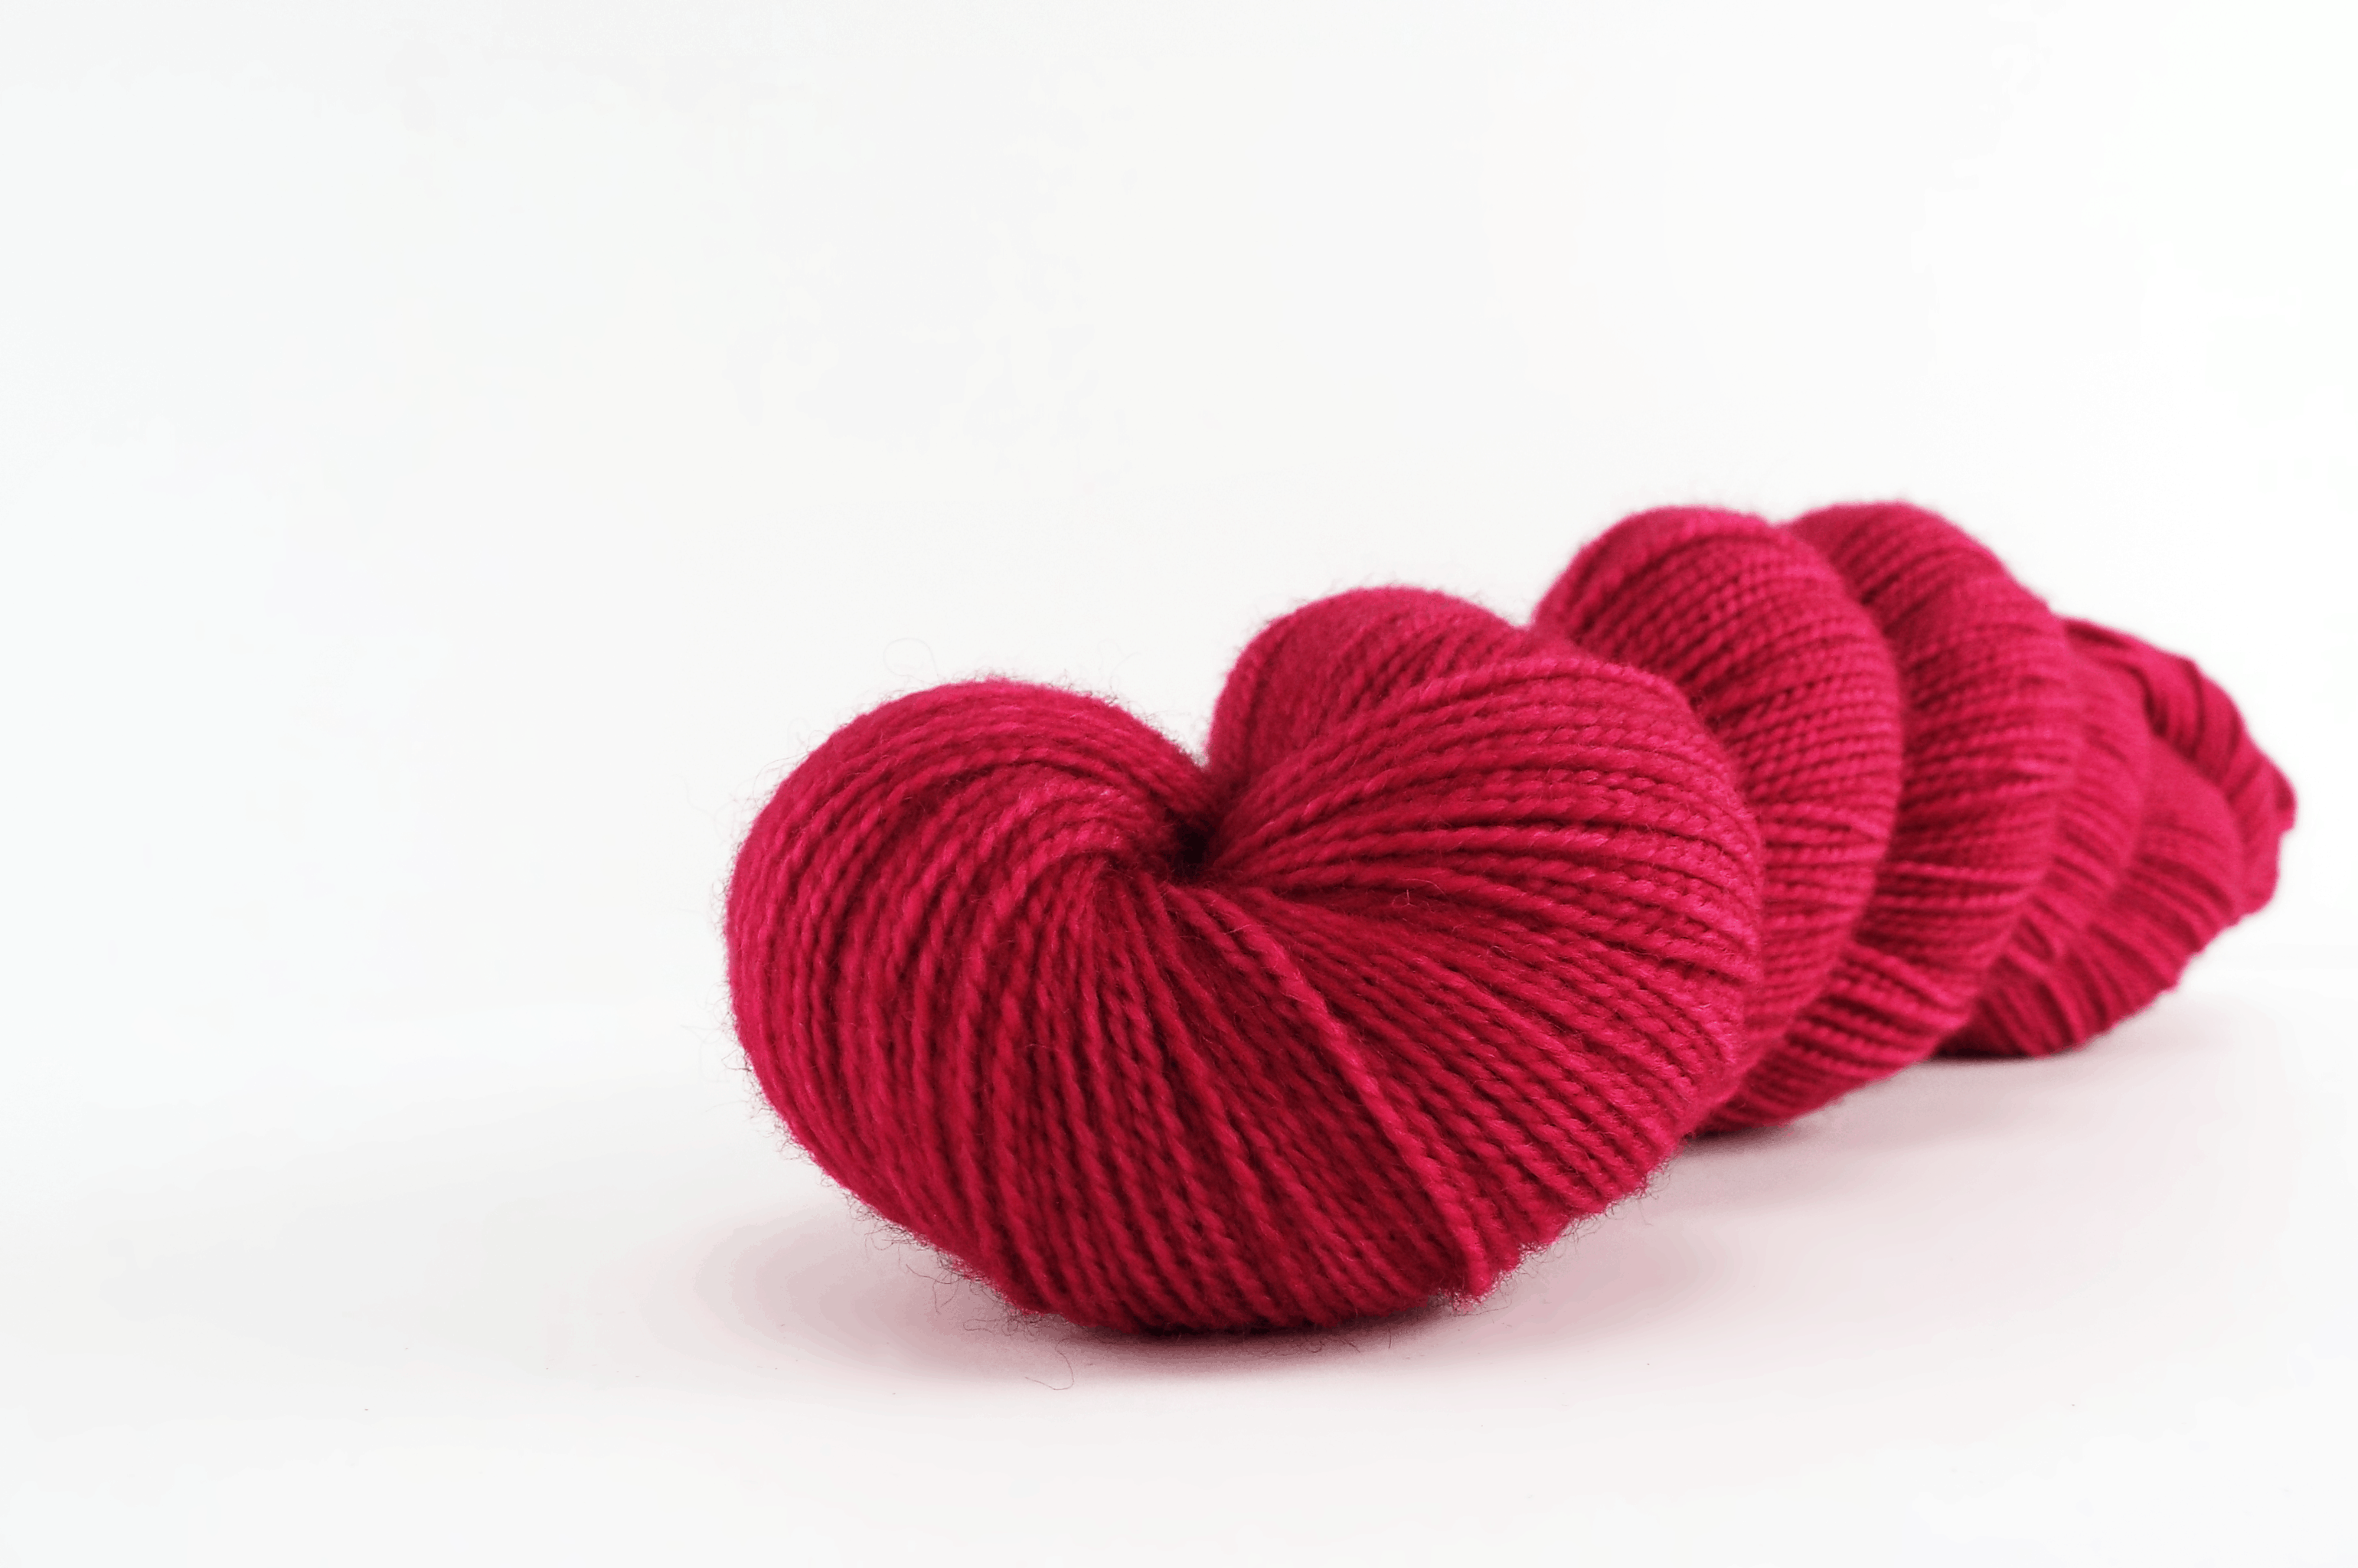 A skein of red yarn.